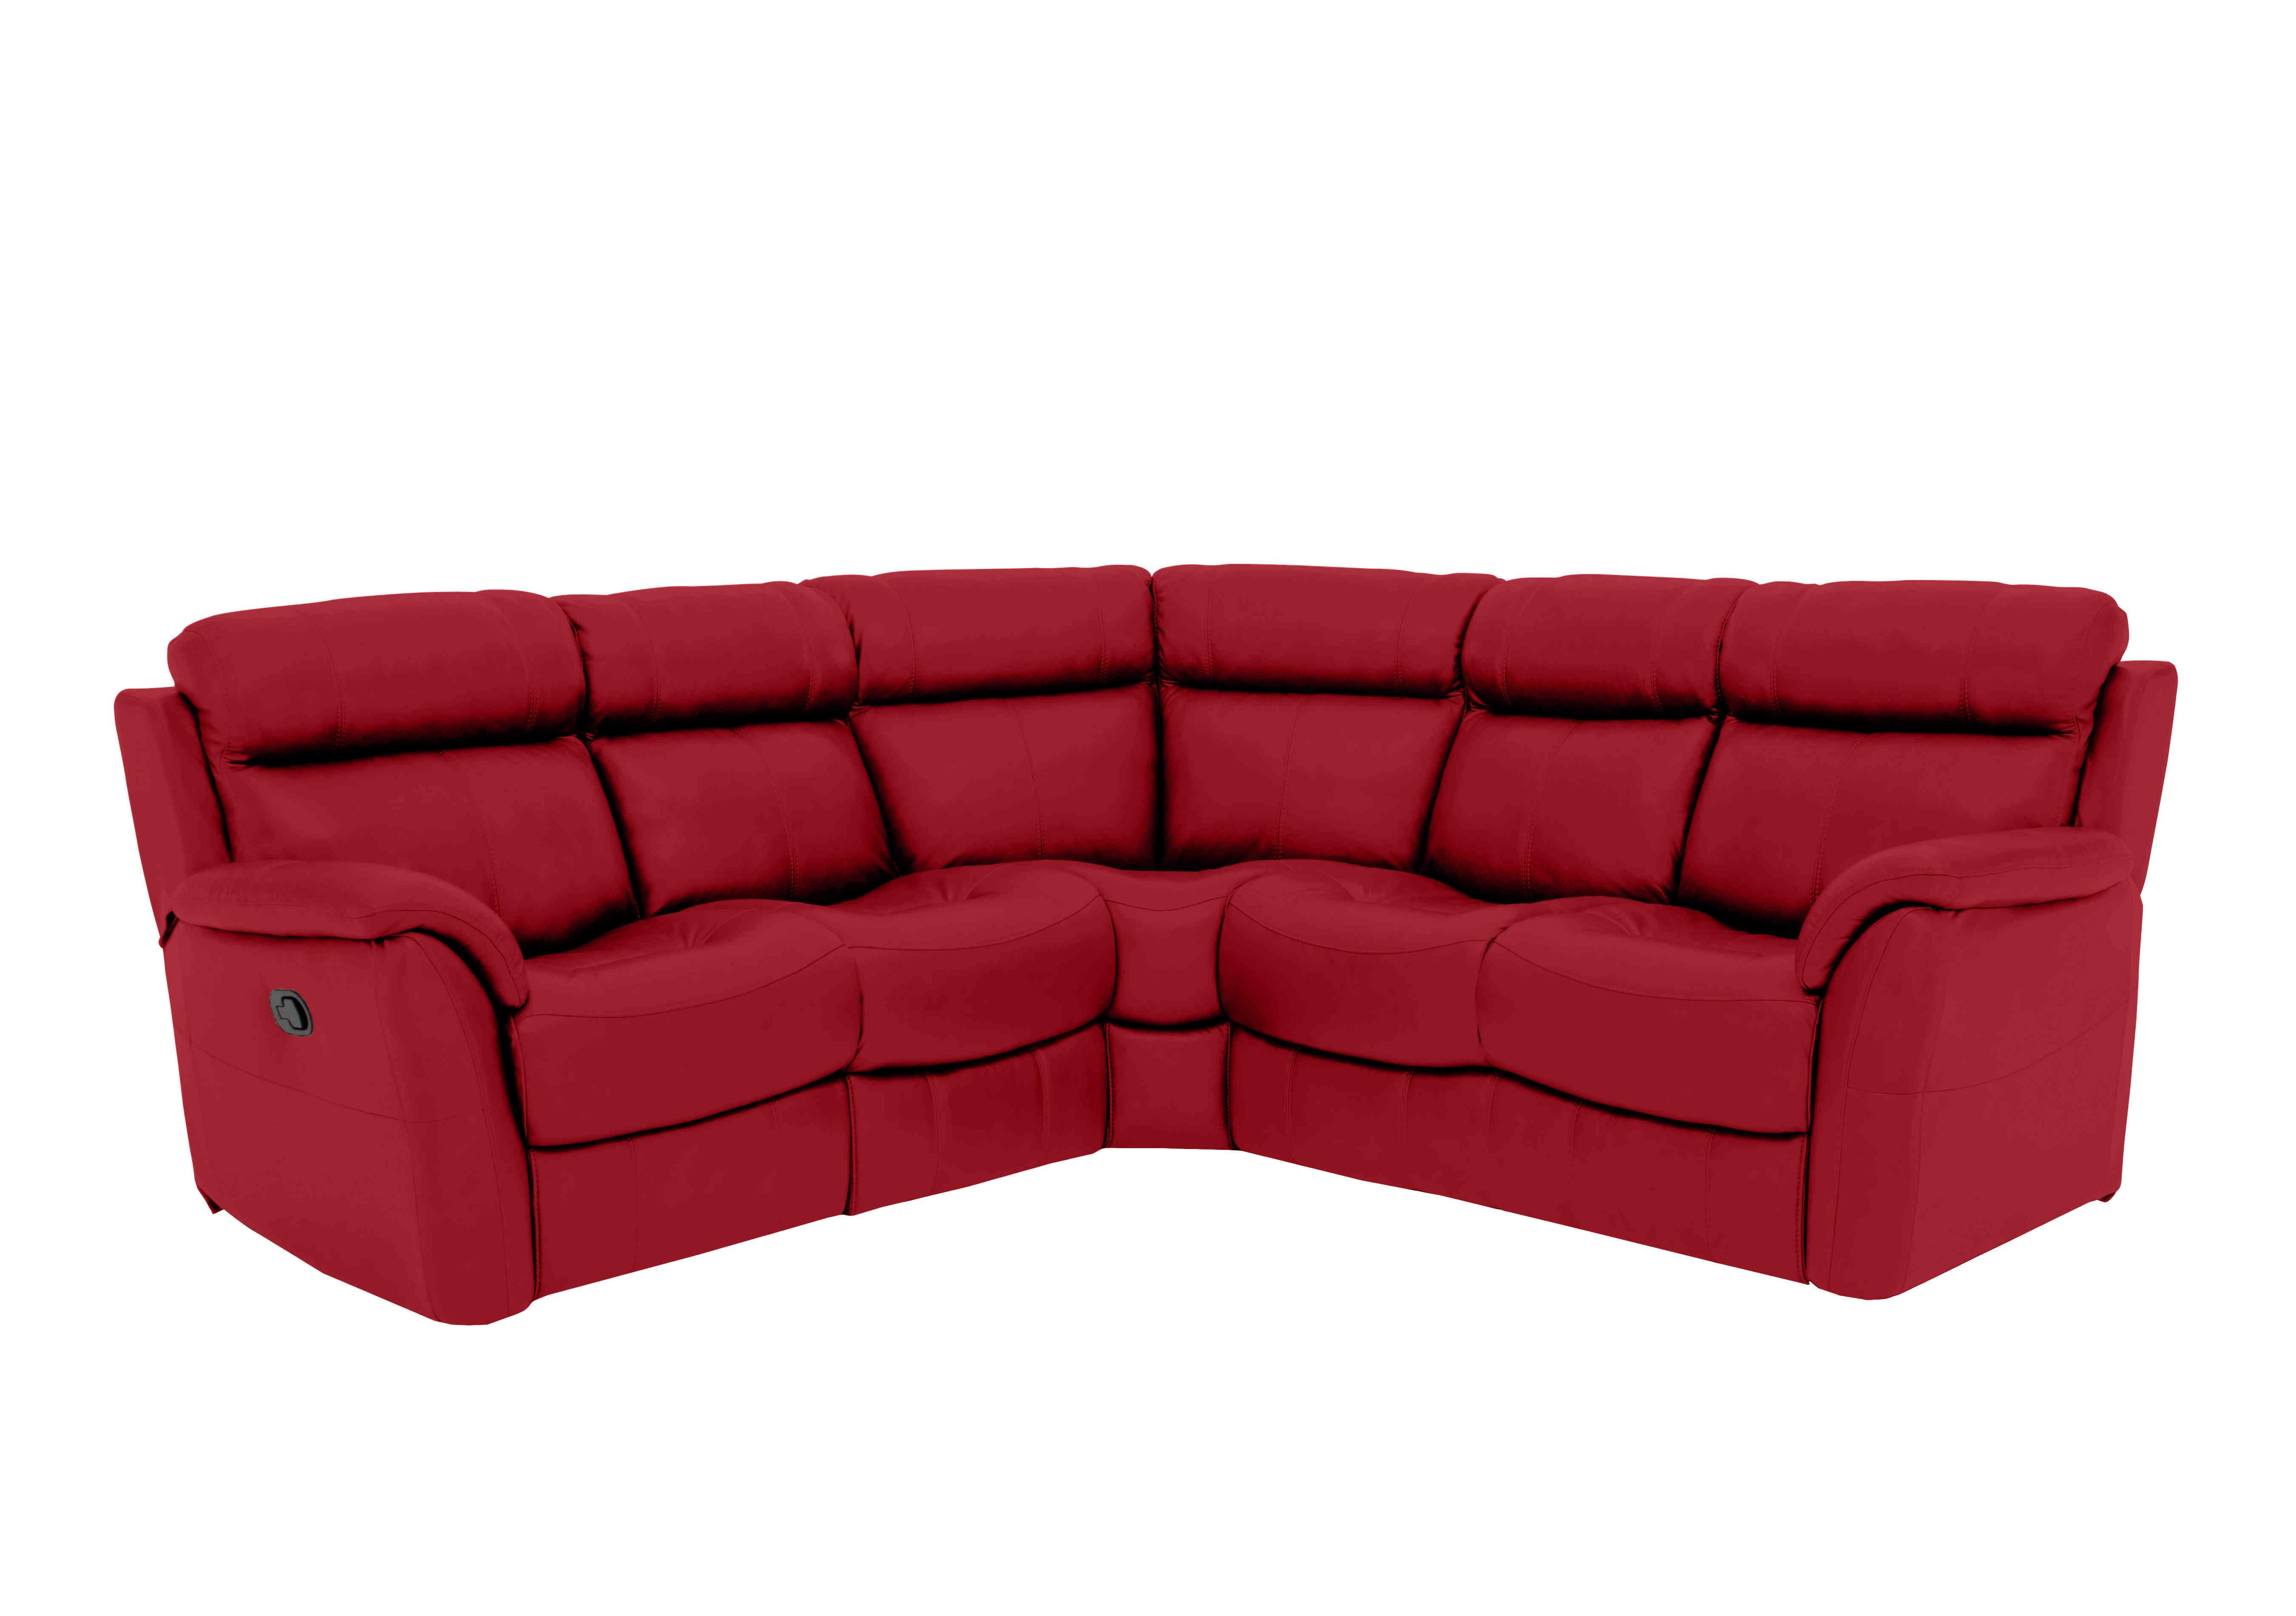 Relax Station Revive Leather Corner Sofa in Bv-0008 Pure Red on Furniture Village